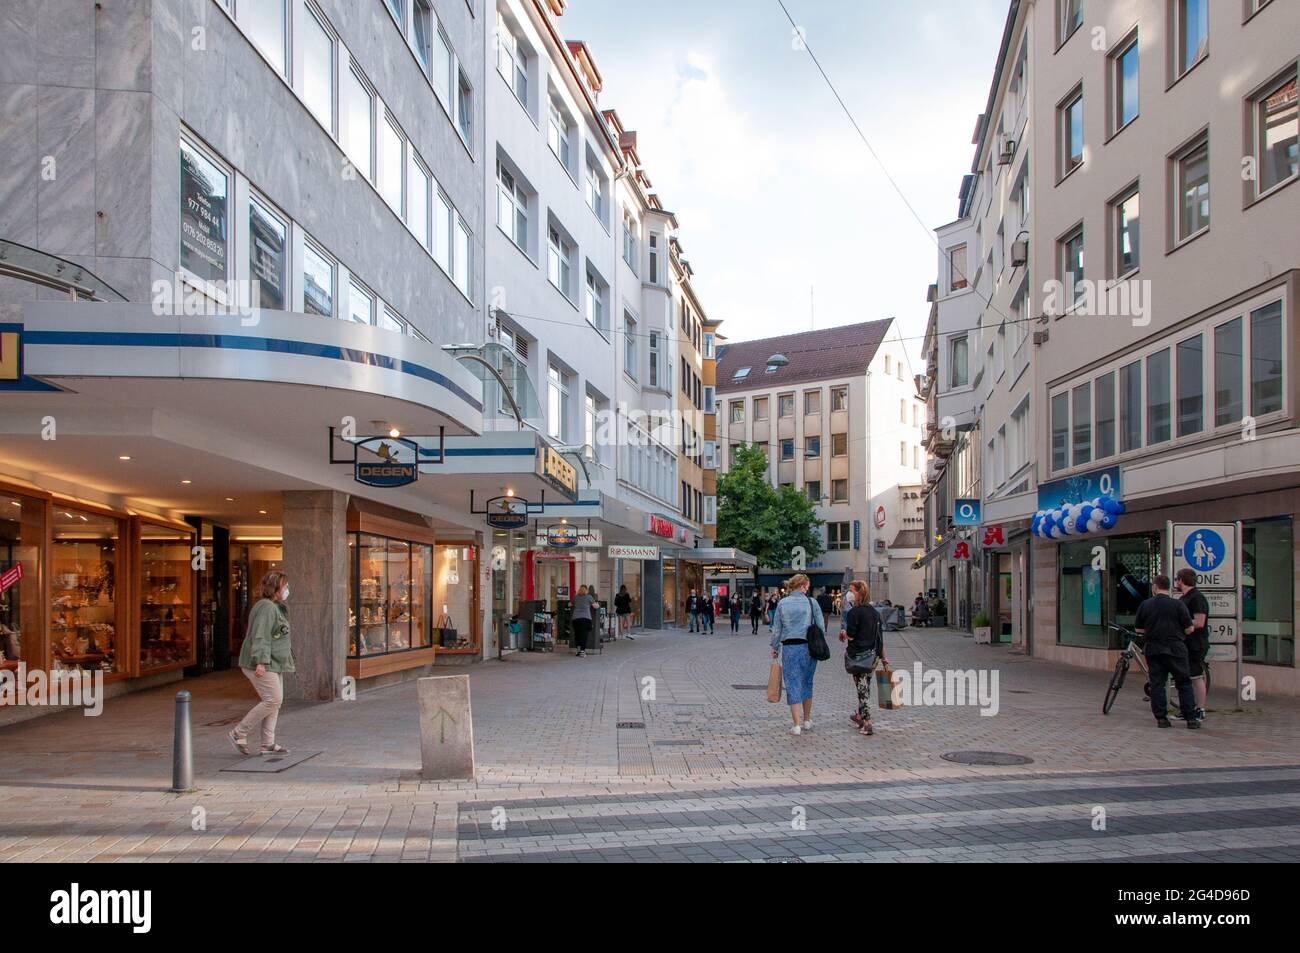 BIELEFELD, GERMANY. JUNE 12, 2021. View of small german street with shops. People walking around Stock Photo